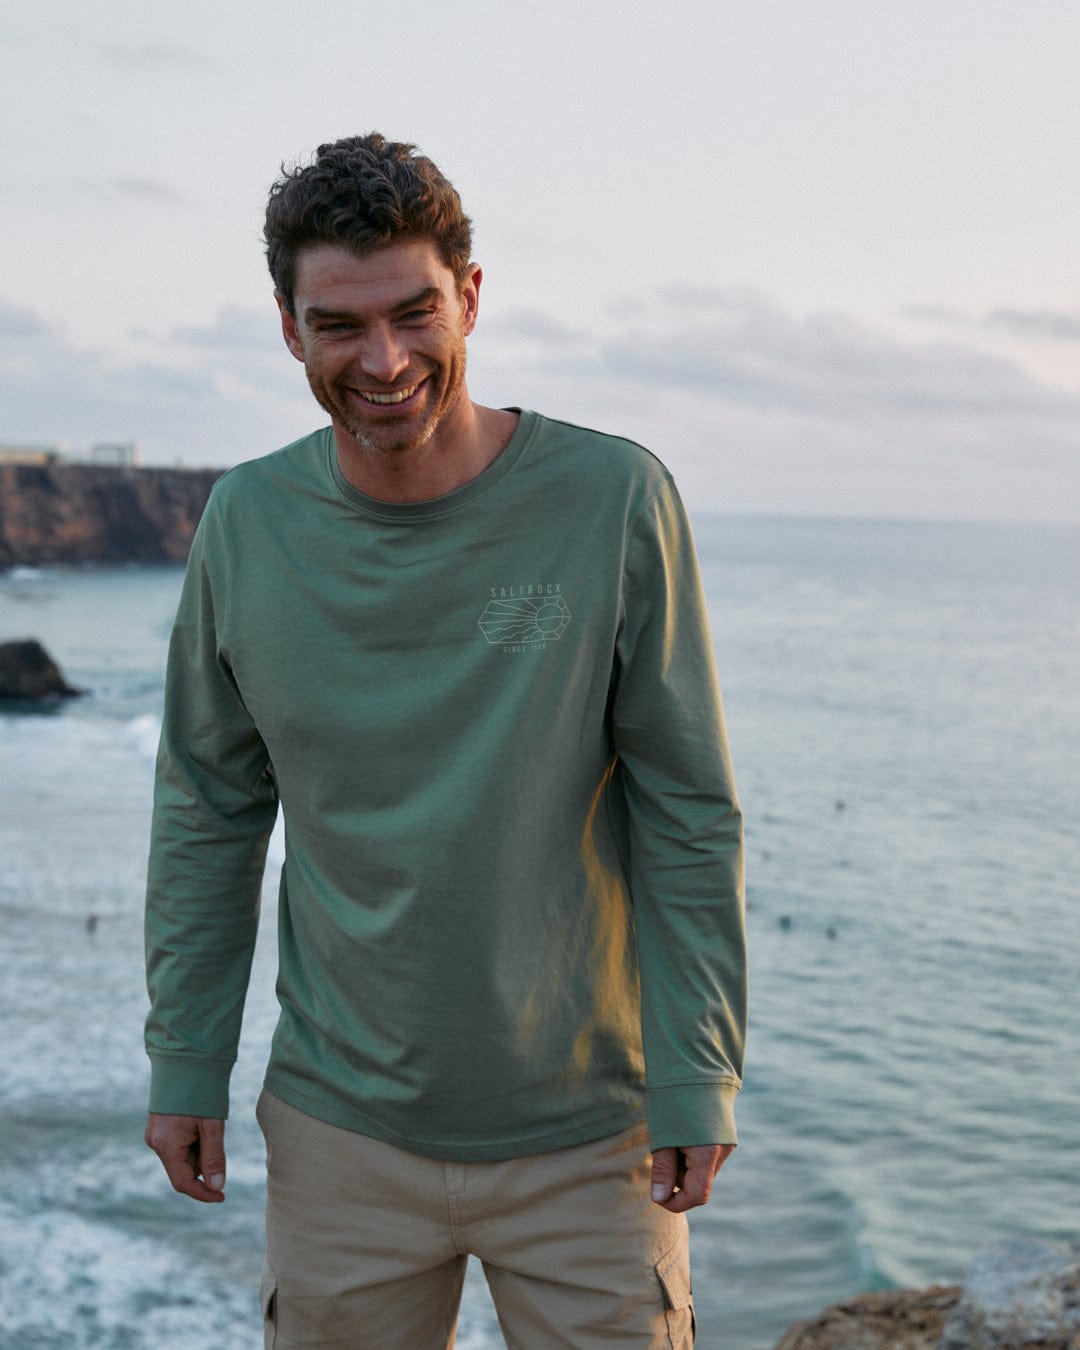 A man standing on a rock near water in a Saltrock Vantage Outline Mens Long Sleeve T-Shirt in Green.